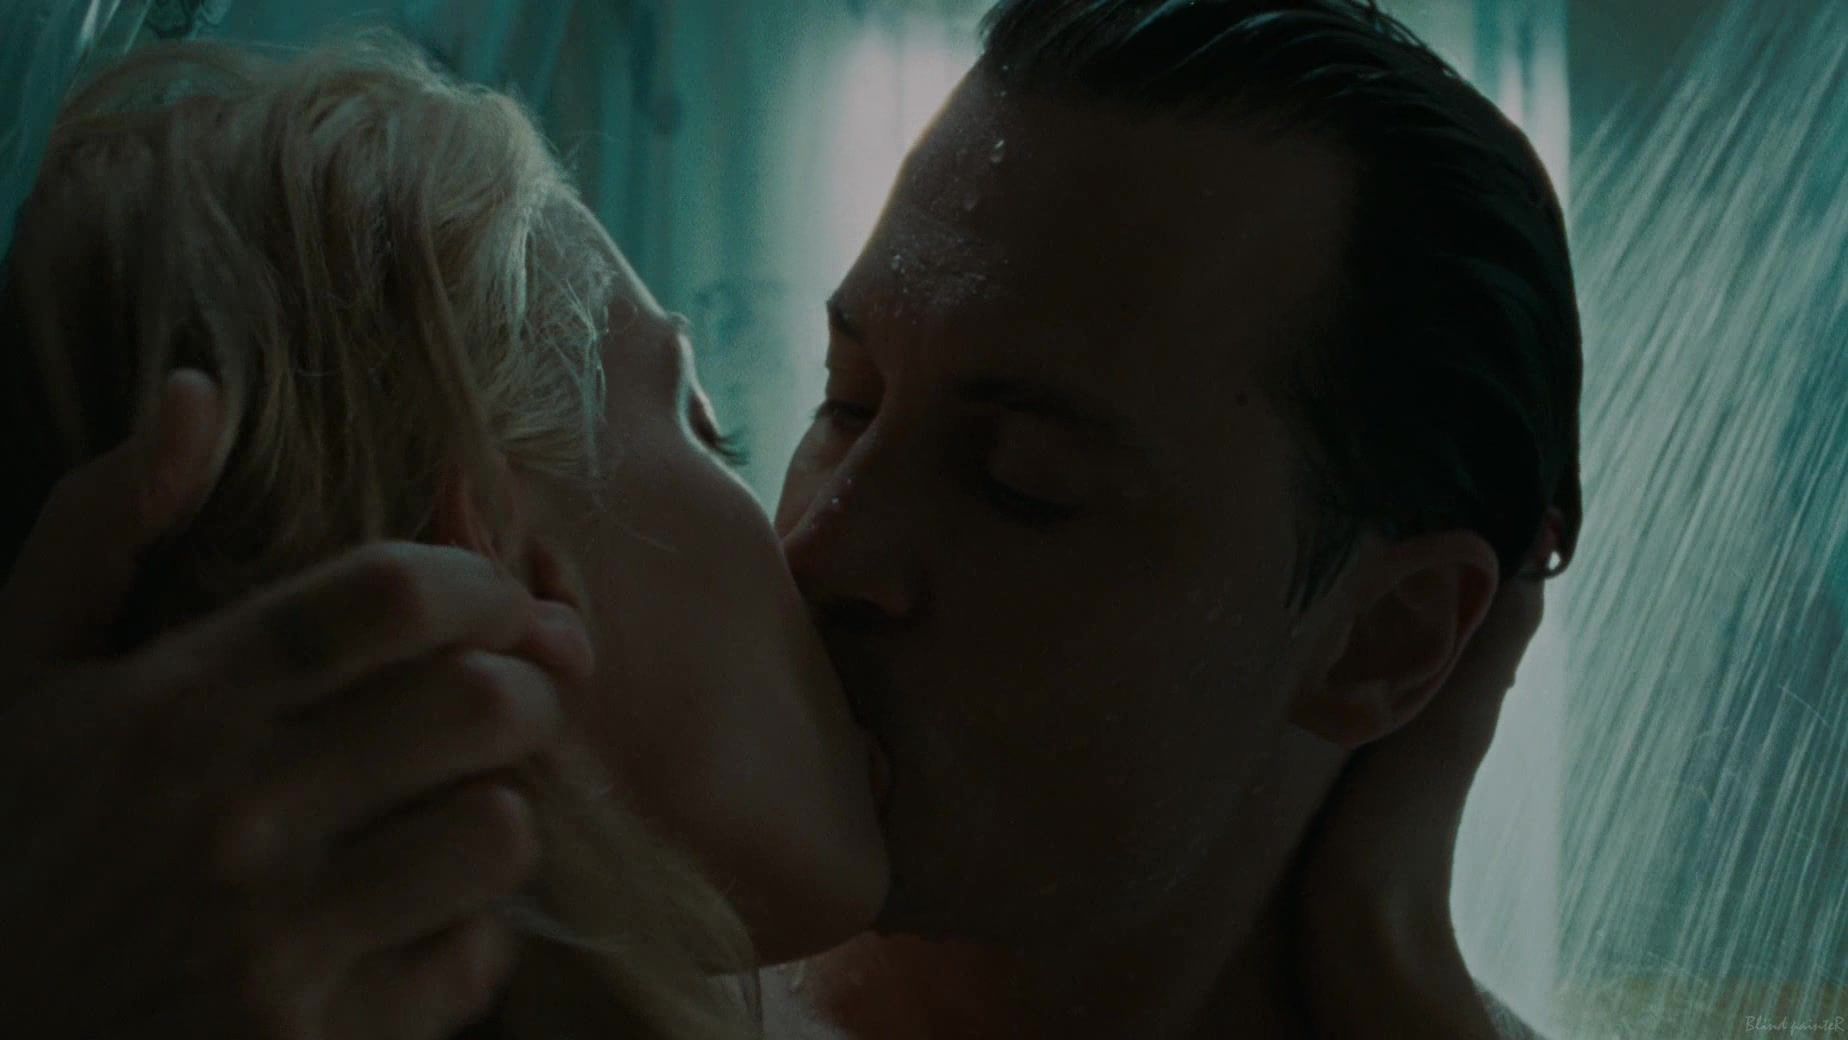 Orgasms Amber Heard nude - The Rum Diary (2011) Twinks - 1